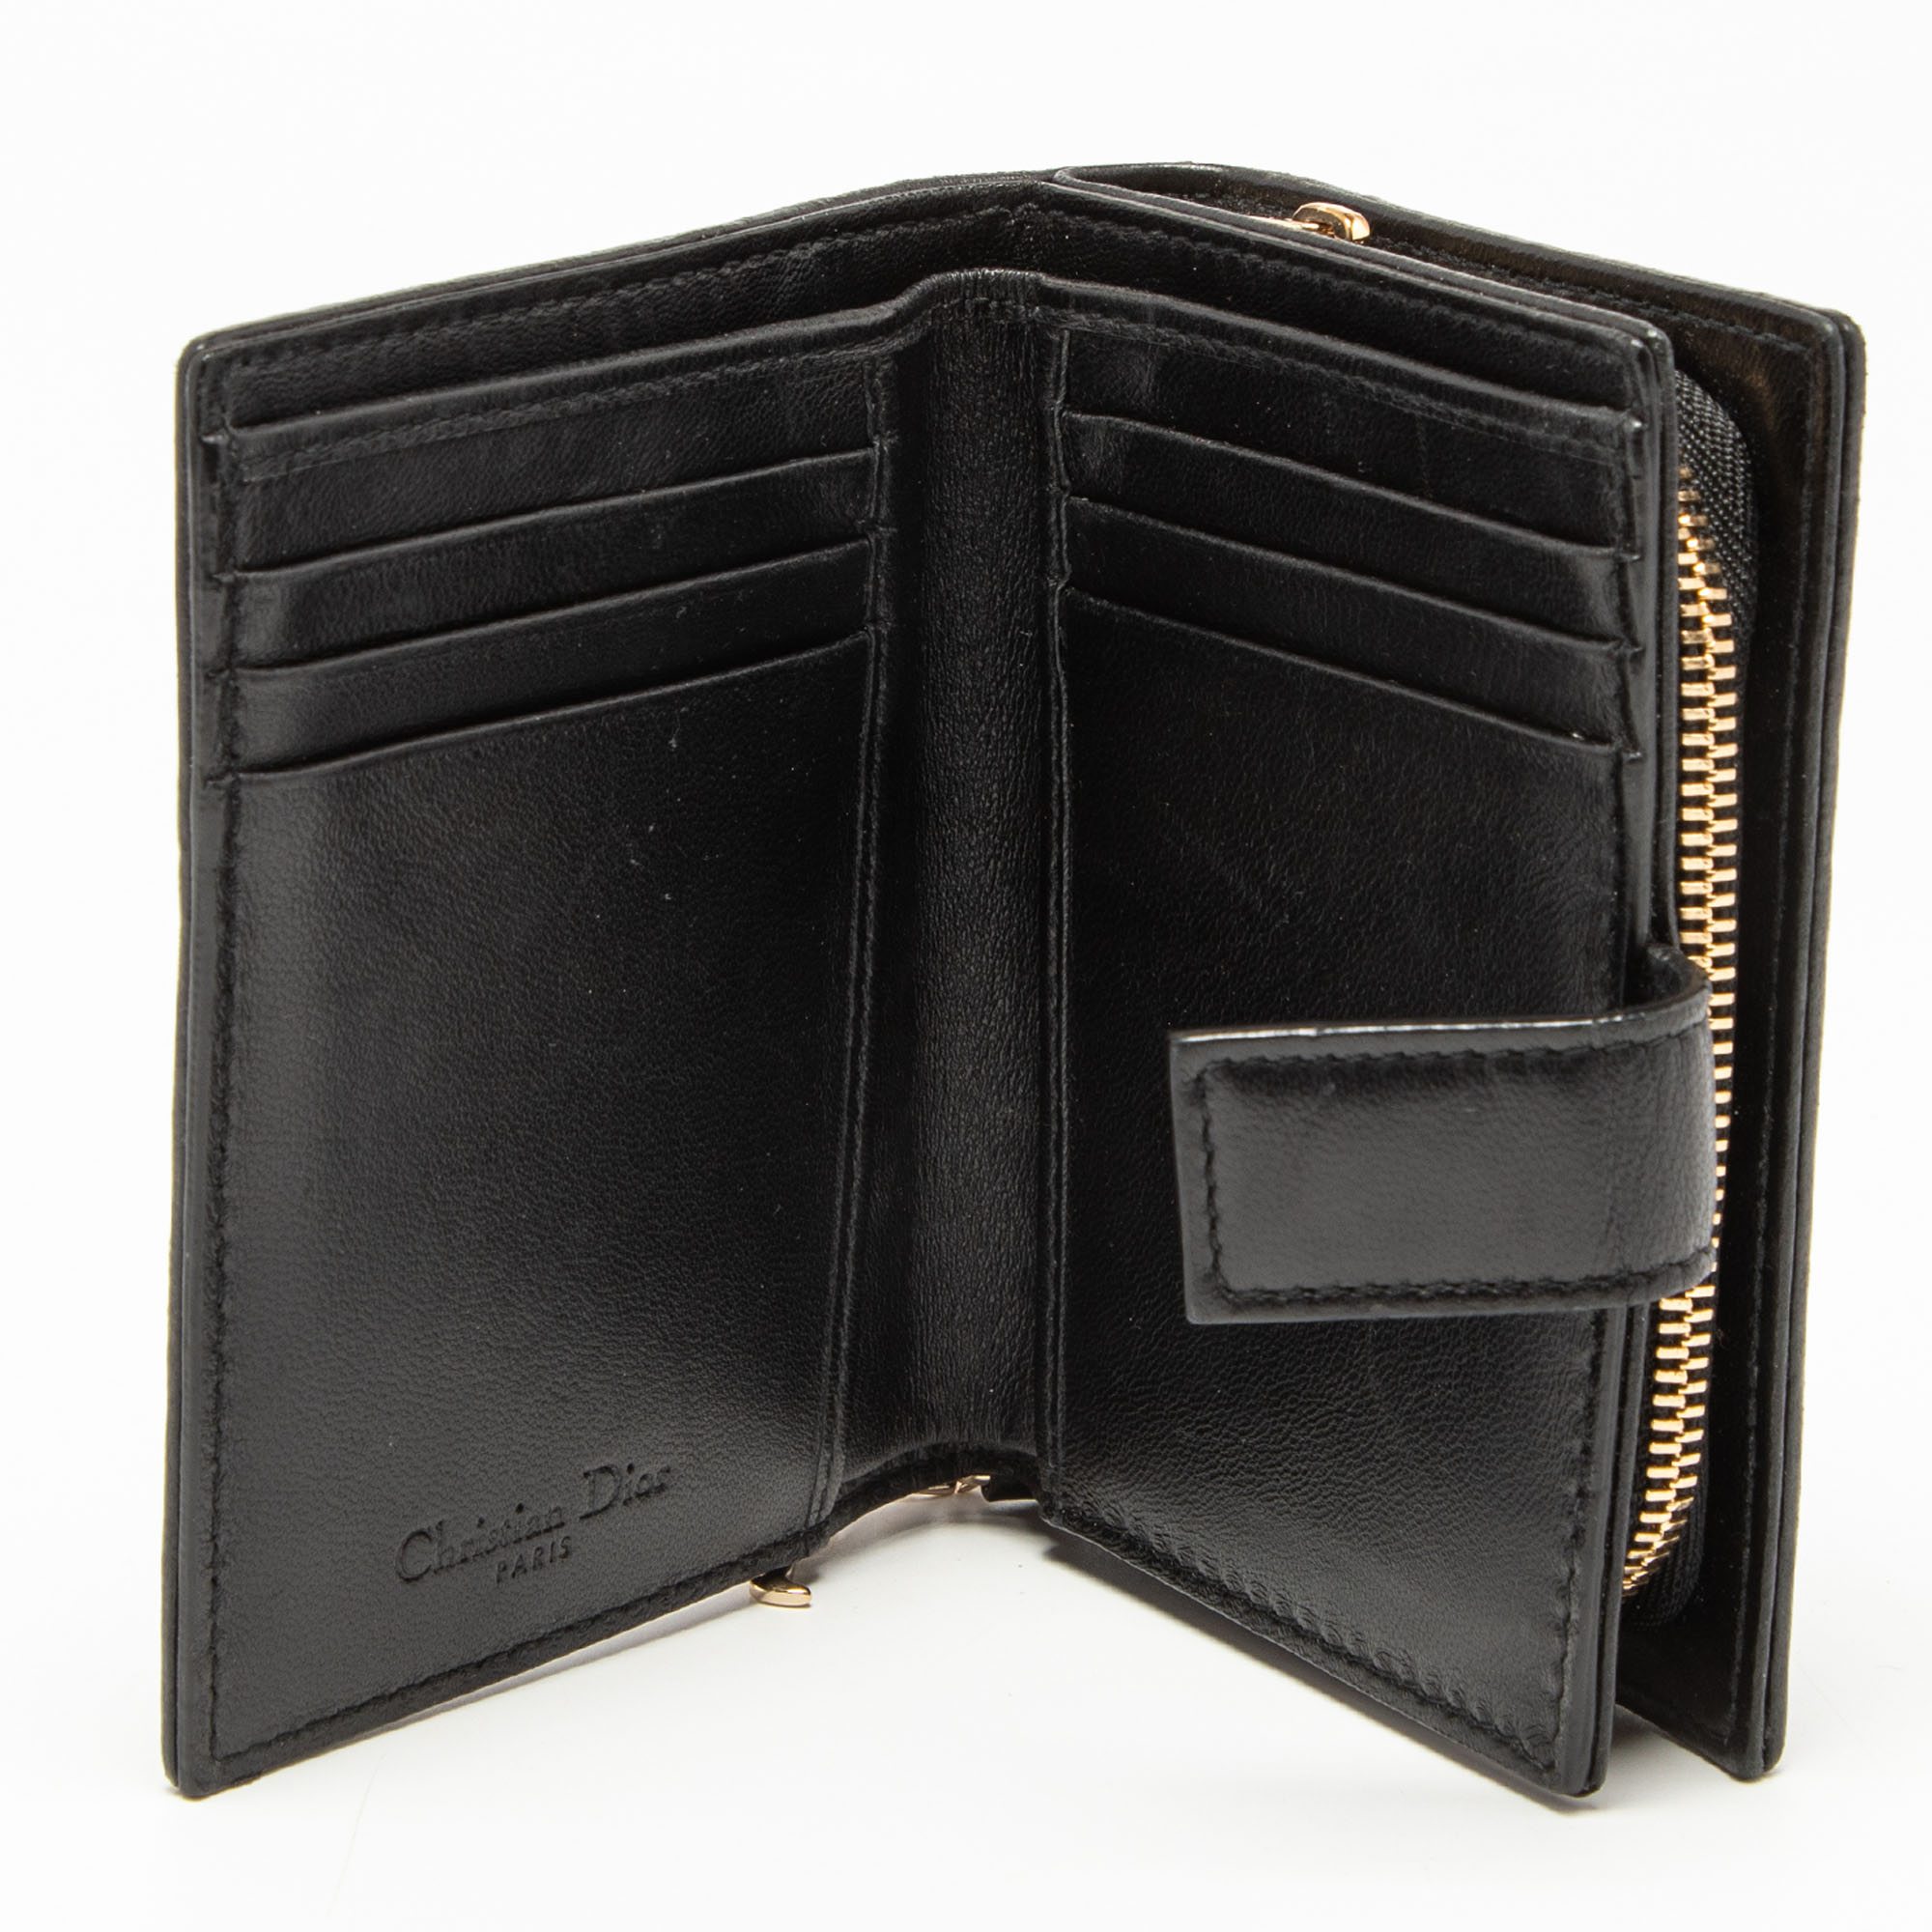 

Dior Black Cannage Leather Lady Dior French Compact Wallet